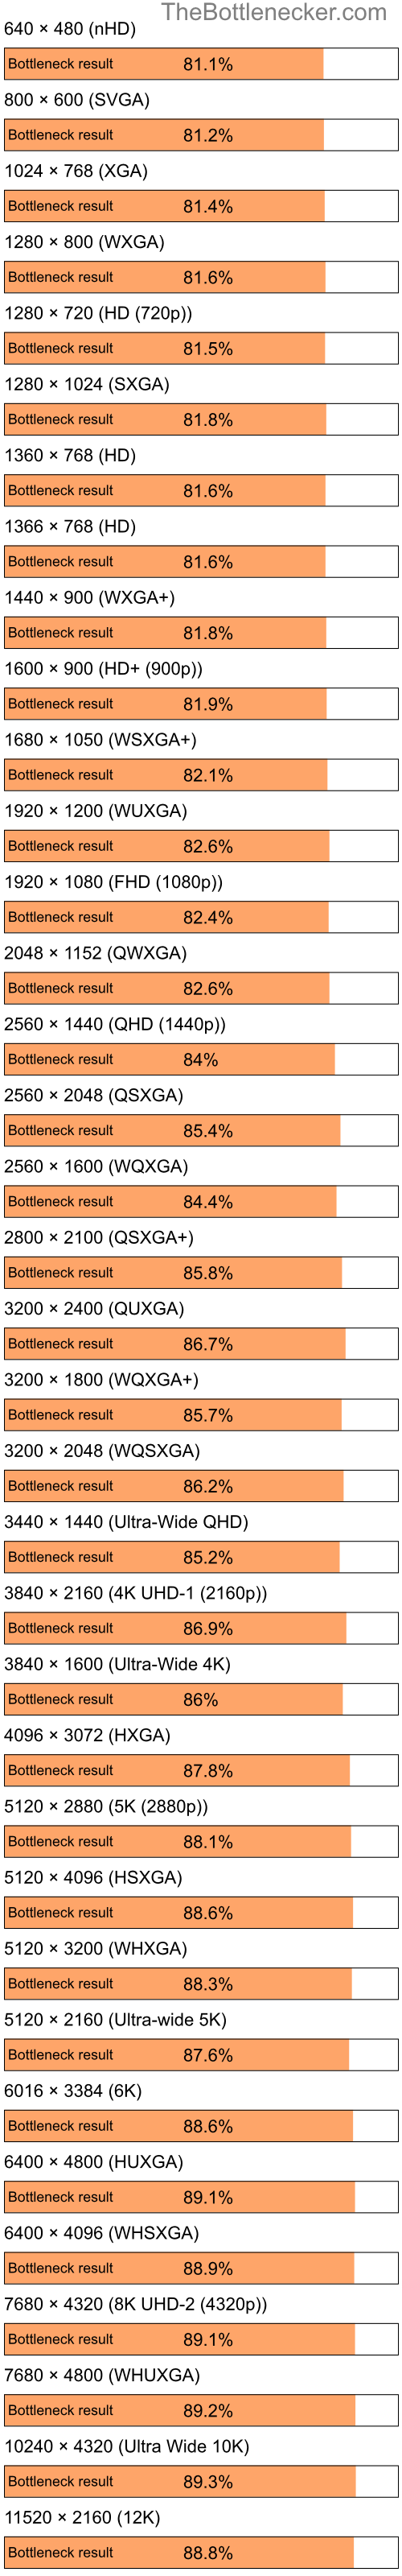 Bottleneck results by resolution for Intel Celeron M and NVIDIA GeForce 7100 in Graphic Card Intense Tasks